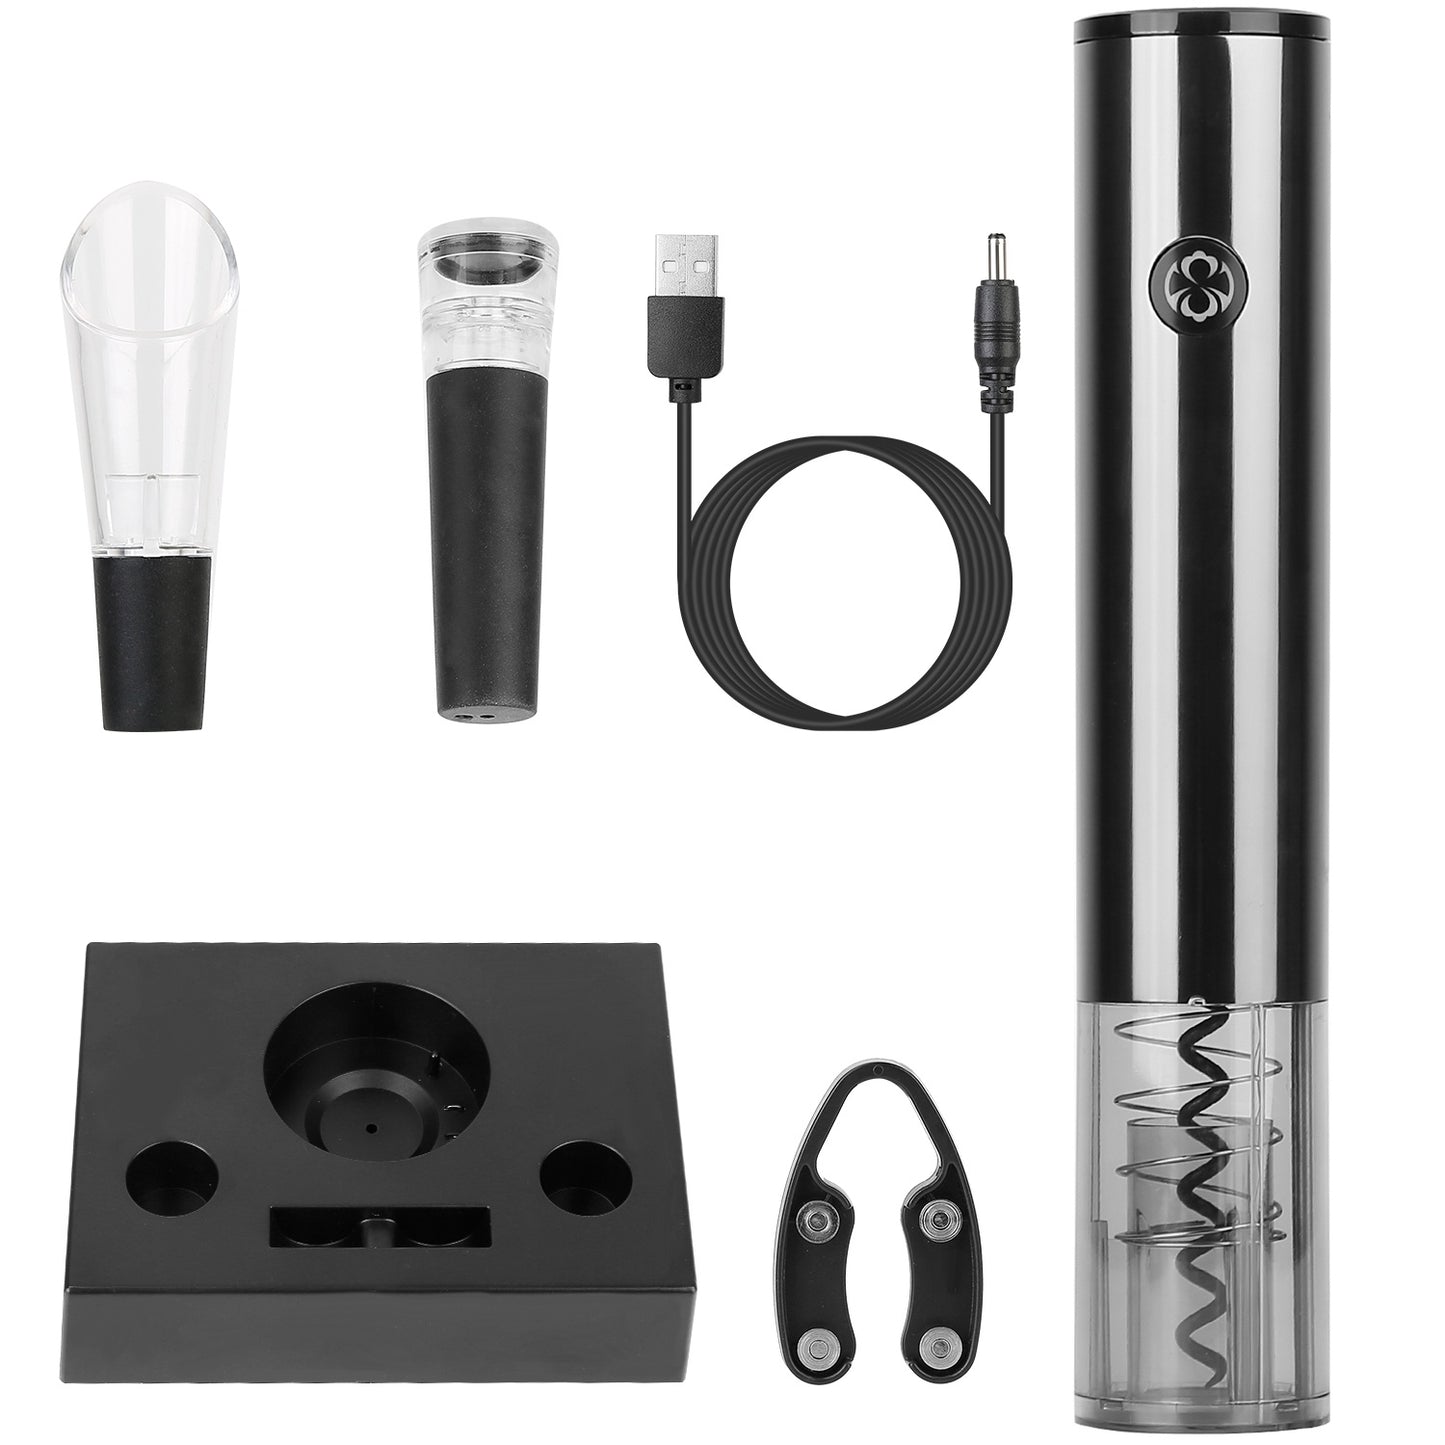 4 in 1 Electric Wine Opener Set Automatic Corkscrew Cordless Rechargeable Wine Opener